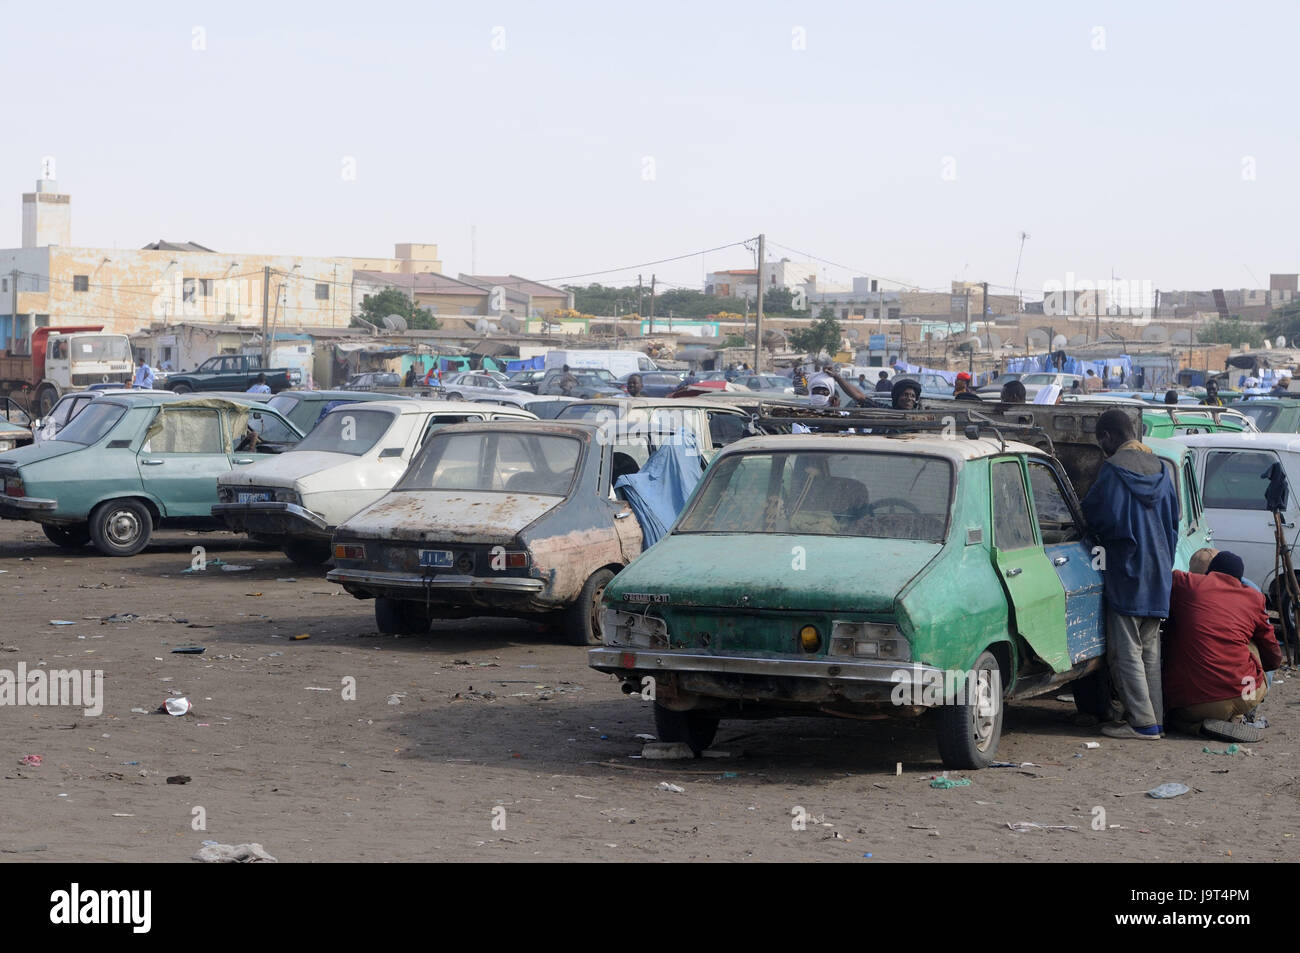 Mauritania,Nouakchott,taxi stand,cars,old,men,Africa,West Africa,town,capital,economy,service,taxis,vehicles,Renault,dilapidatedly,rust bowers,people,locals,non-whites,outside, Stock Photo